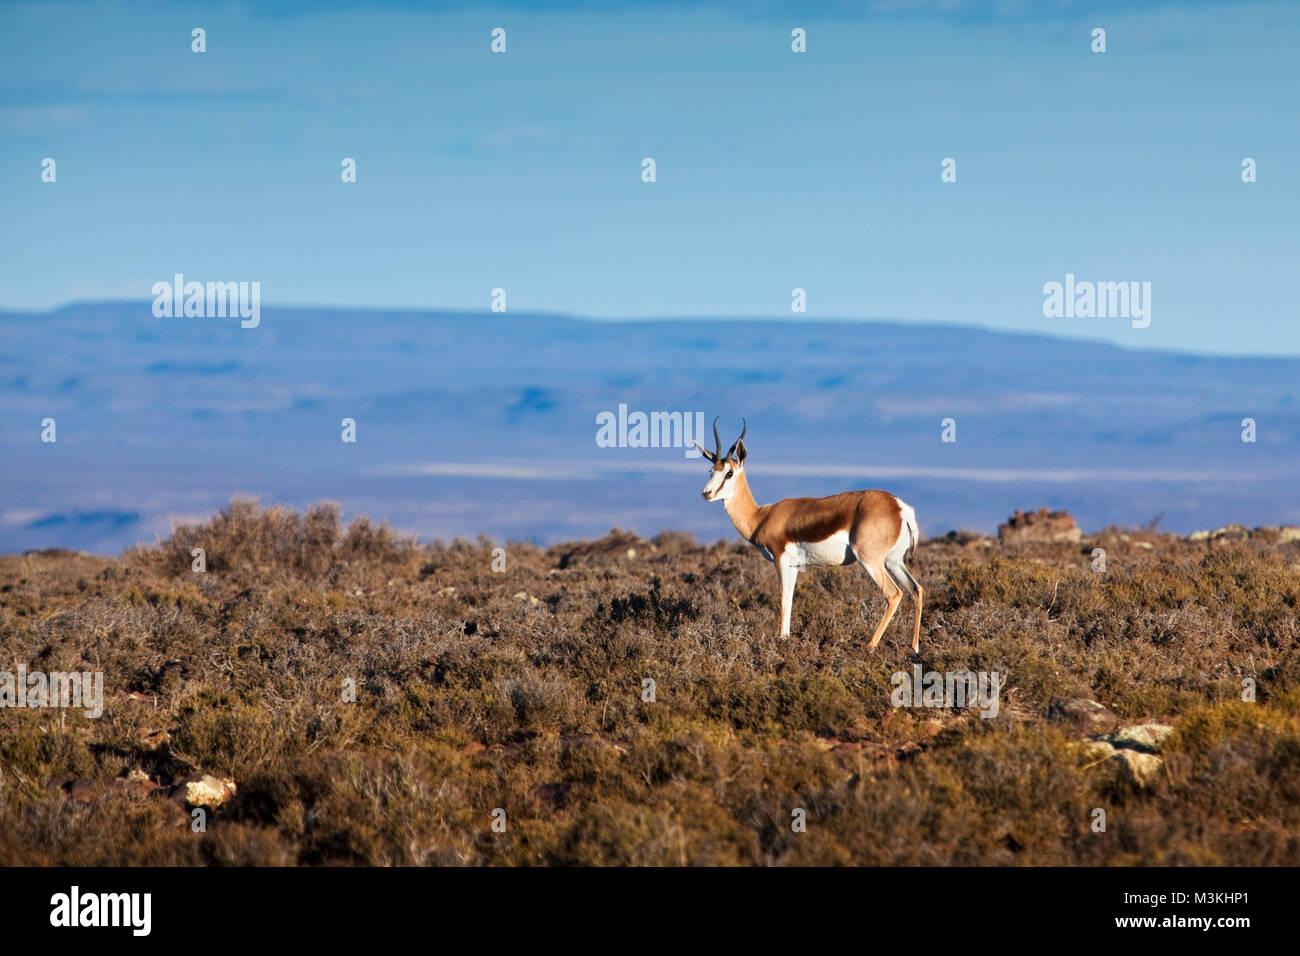 South Africa, Northern Cape, Sutherland, Springbok in Karoo landscape. Stock Photo